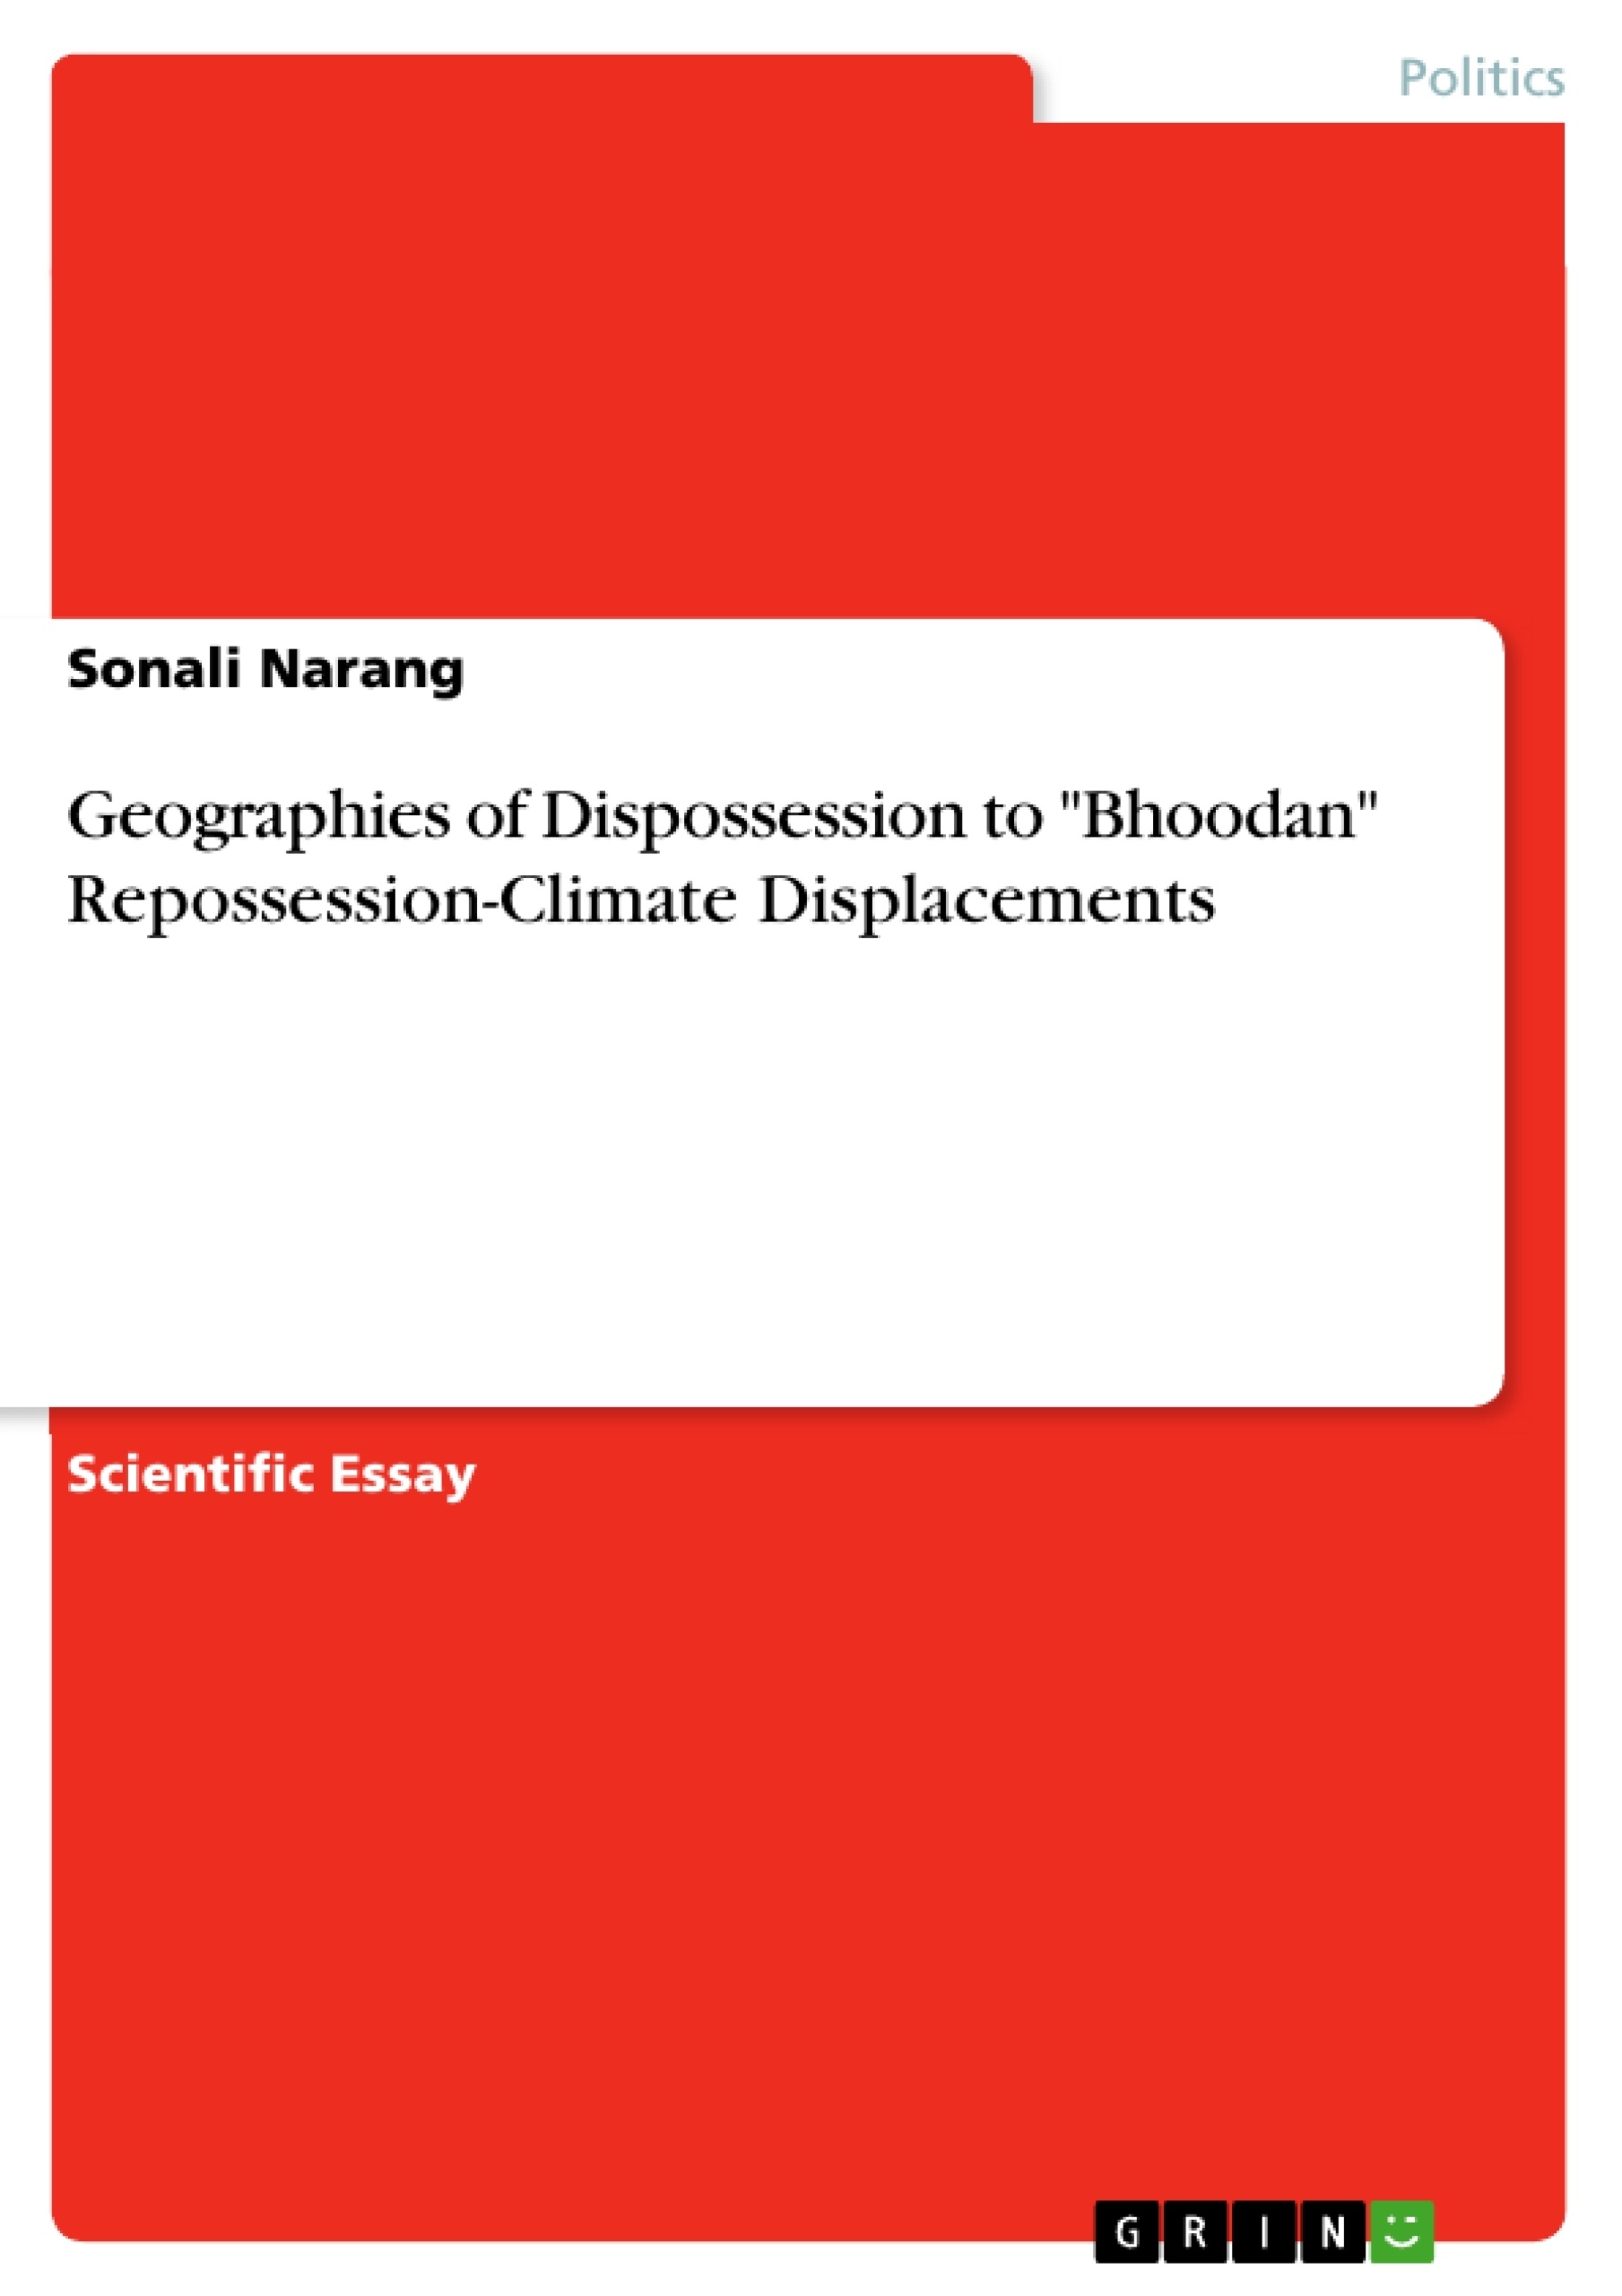 Title: Geographies of Dispossession to "Bhoodan" Repossession-Climate Displacements